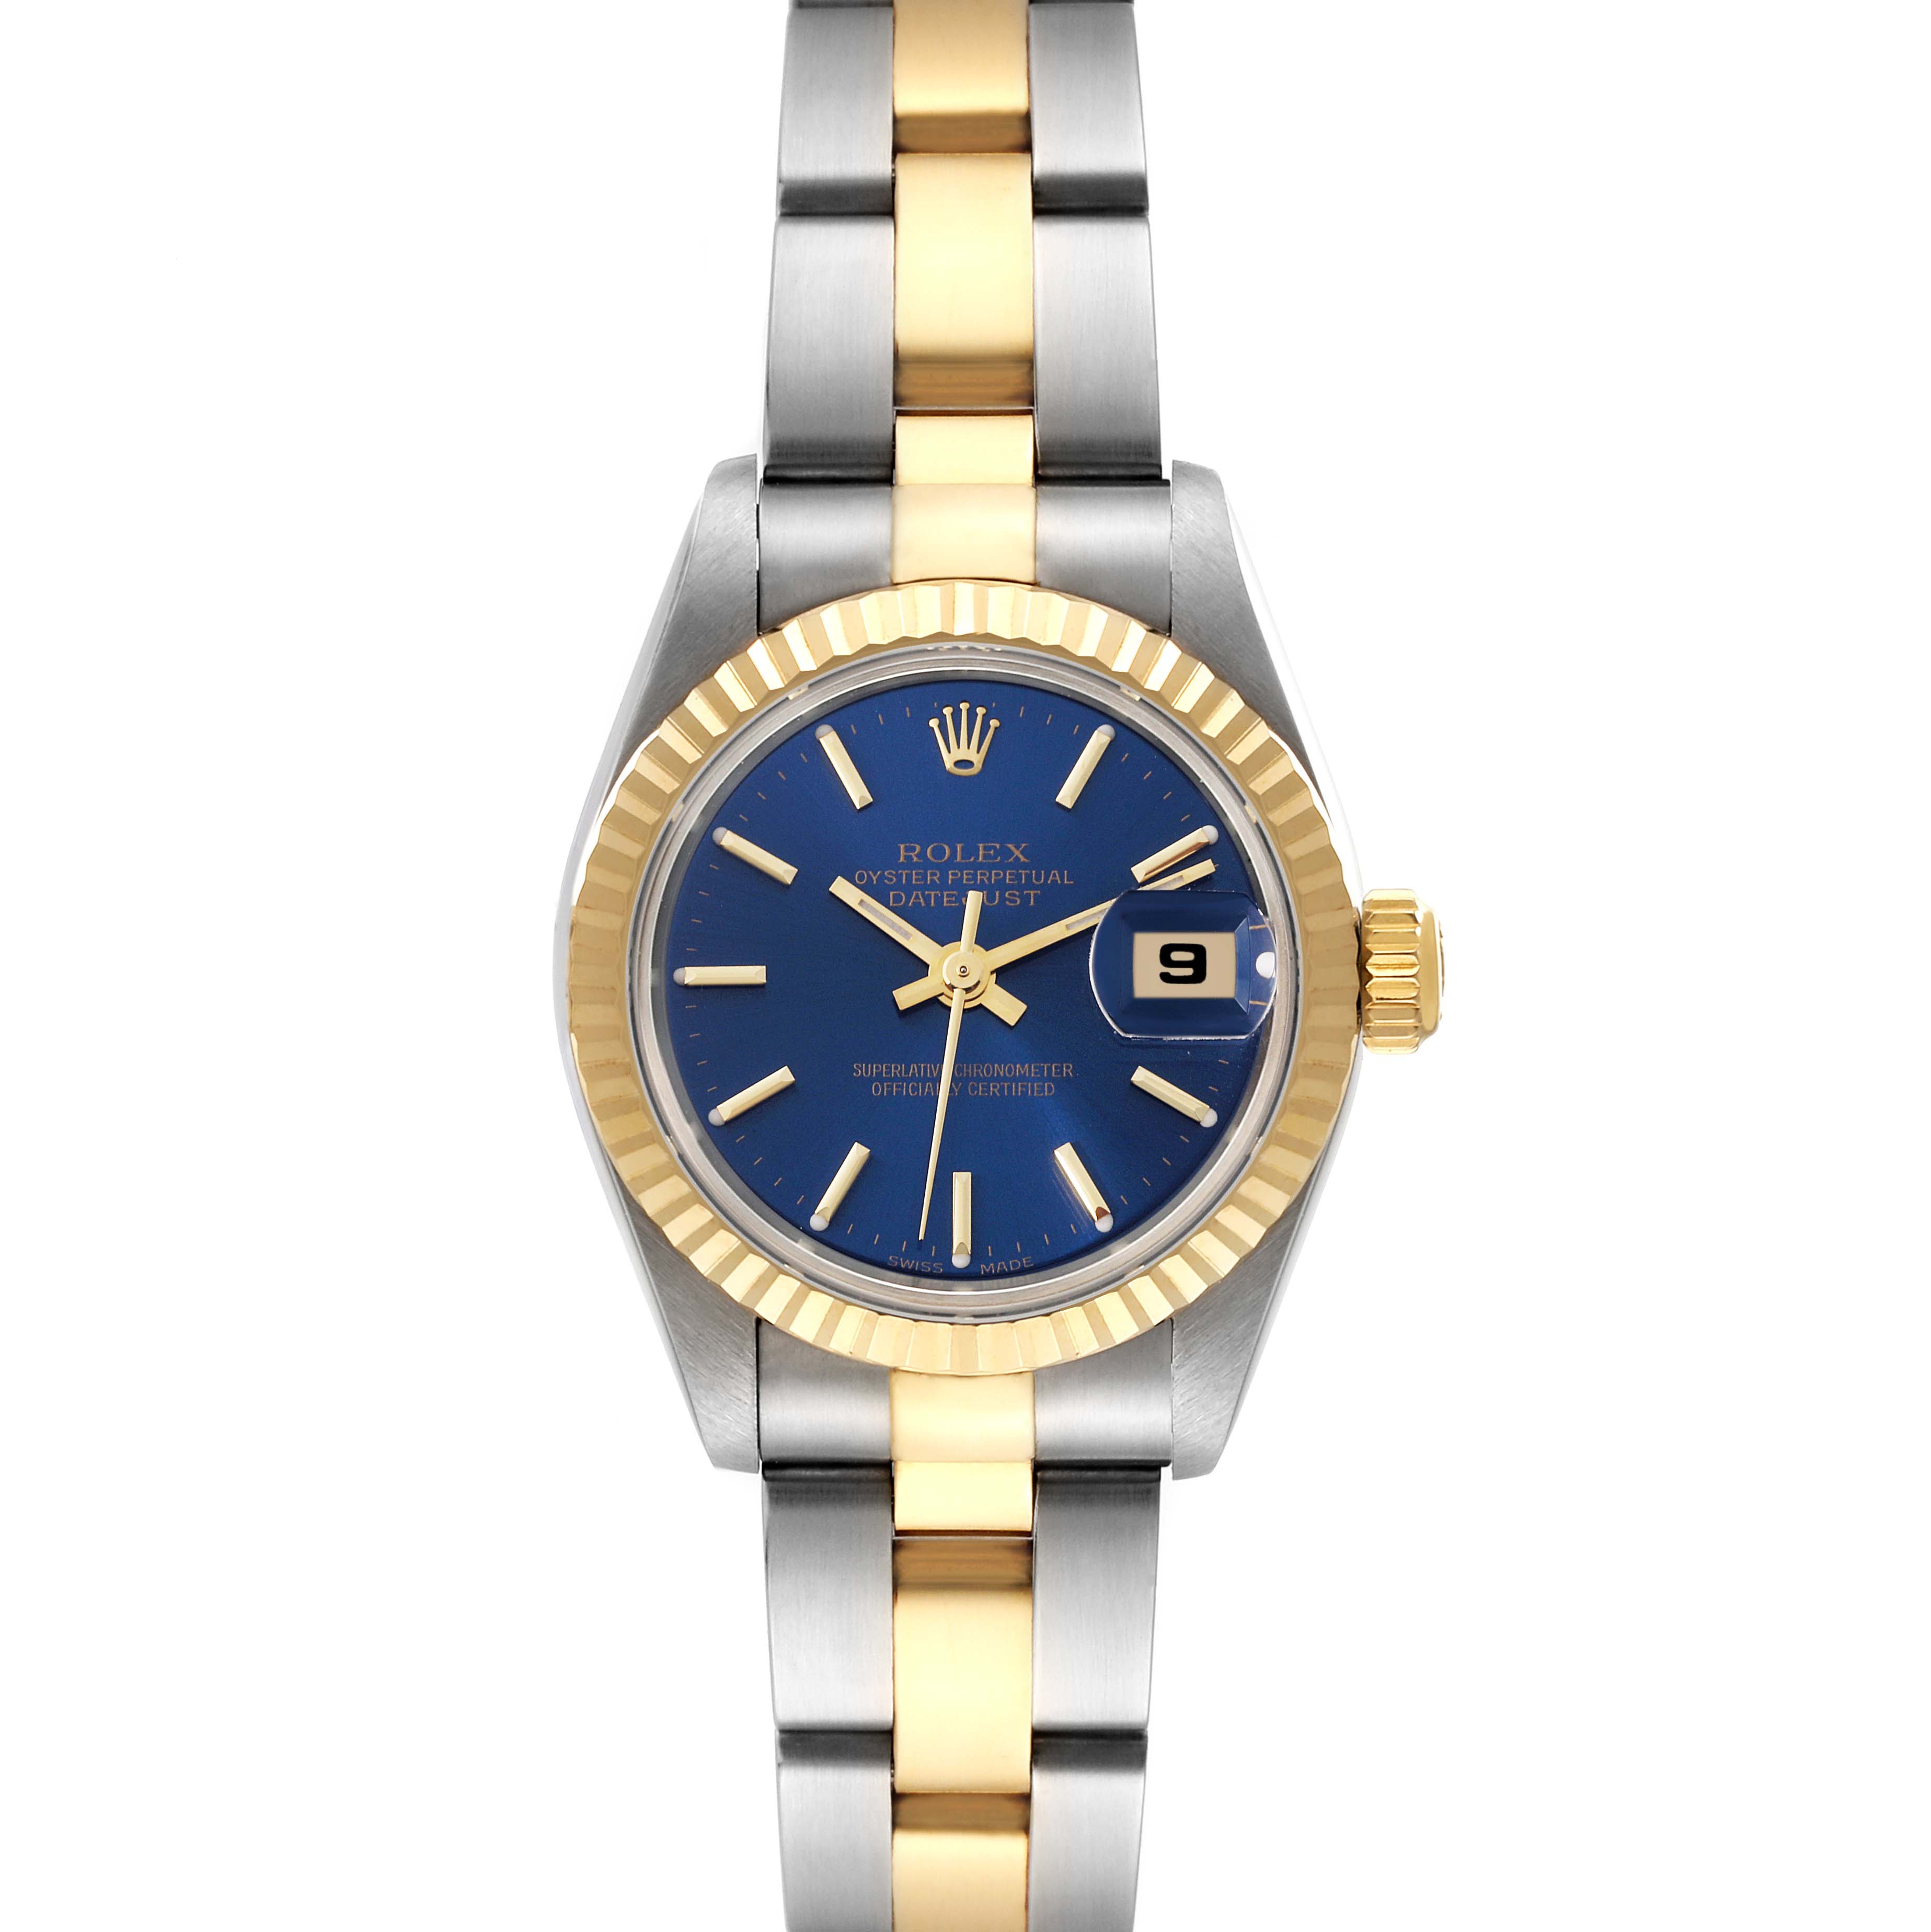 Rolex Women's Datejust Two Tone Fluted Dial